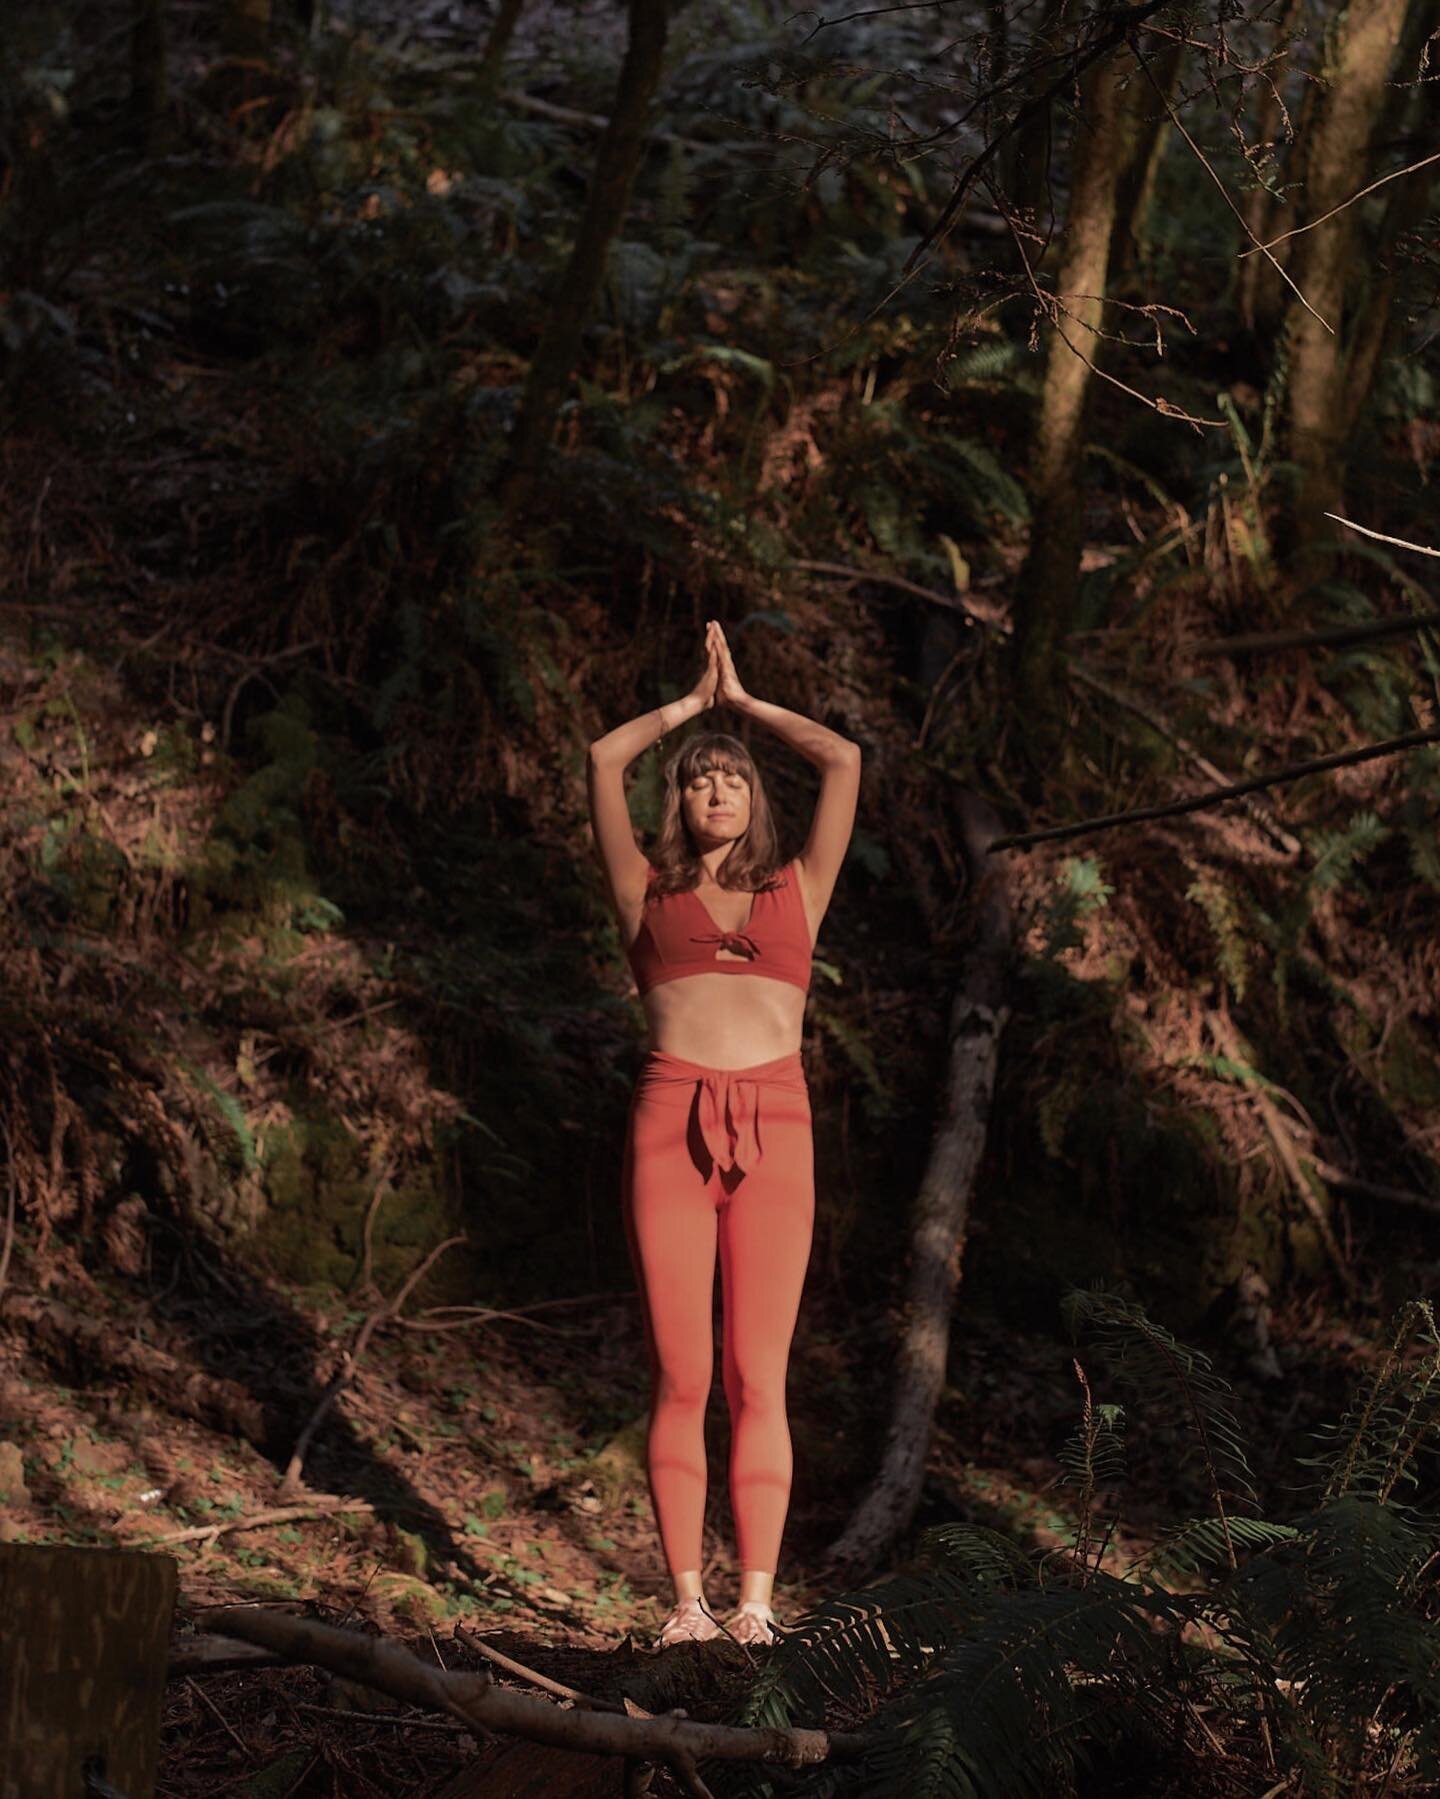 &lsquo;Keep close to Nature&rsquo;s heart and break clear away, once in a while, and climb a mountain or spend a week in the woods. Wash your spirit clean.&rsquo; &mdash; John Muir 🪷

Looking forward to sharing some of my favorite yoga and meditatio